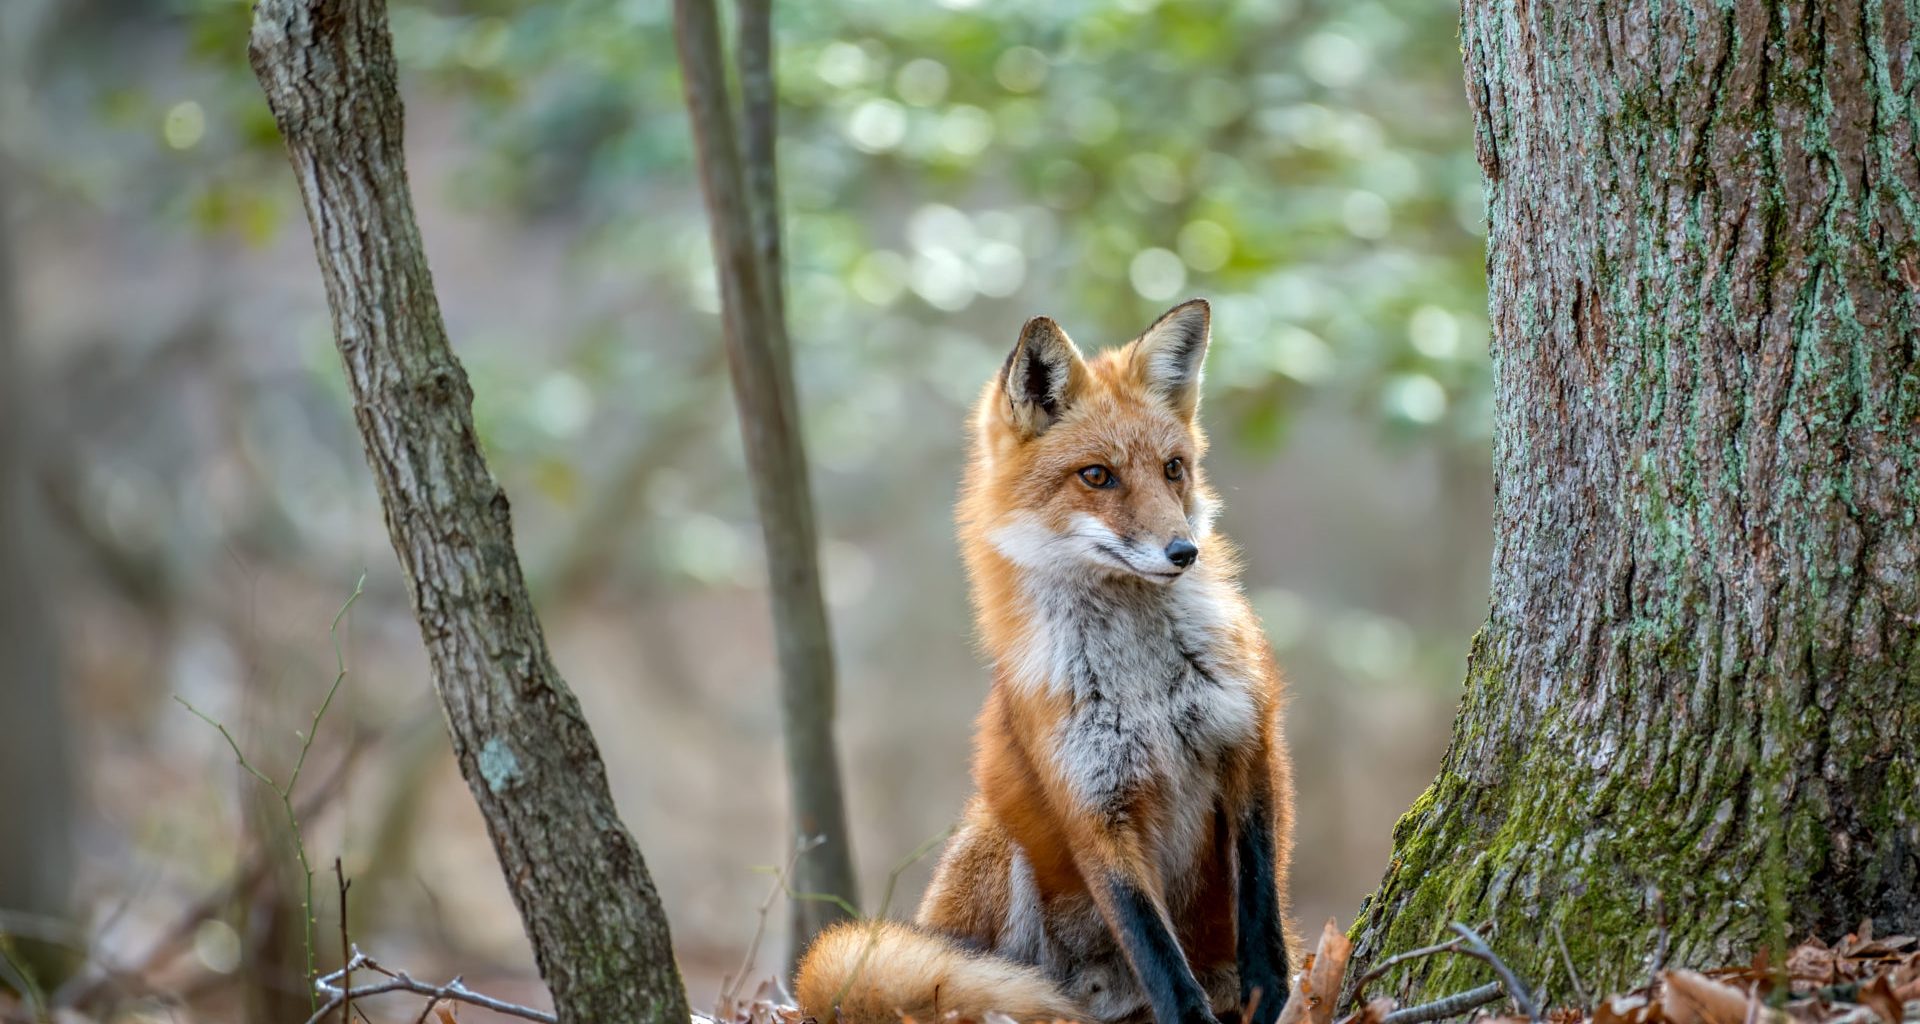 Animal charity urges ministers to enact plans for tighter fox hunting law after huntsman convicted 4